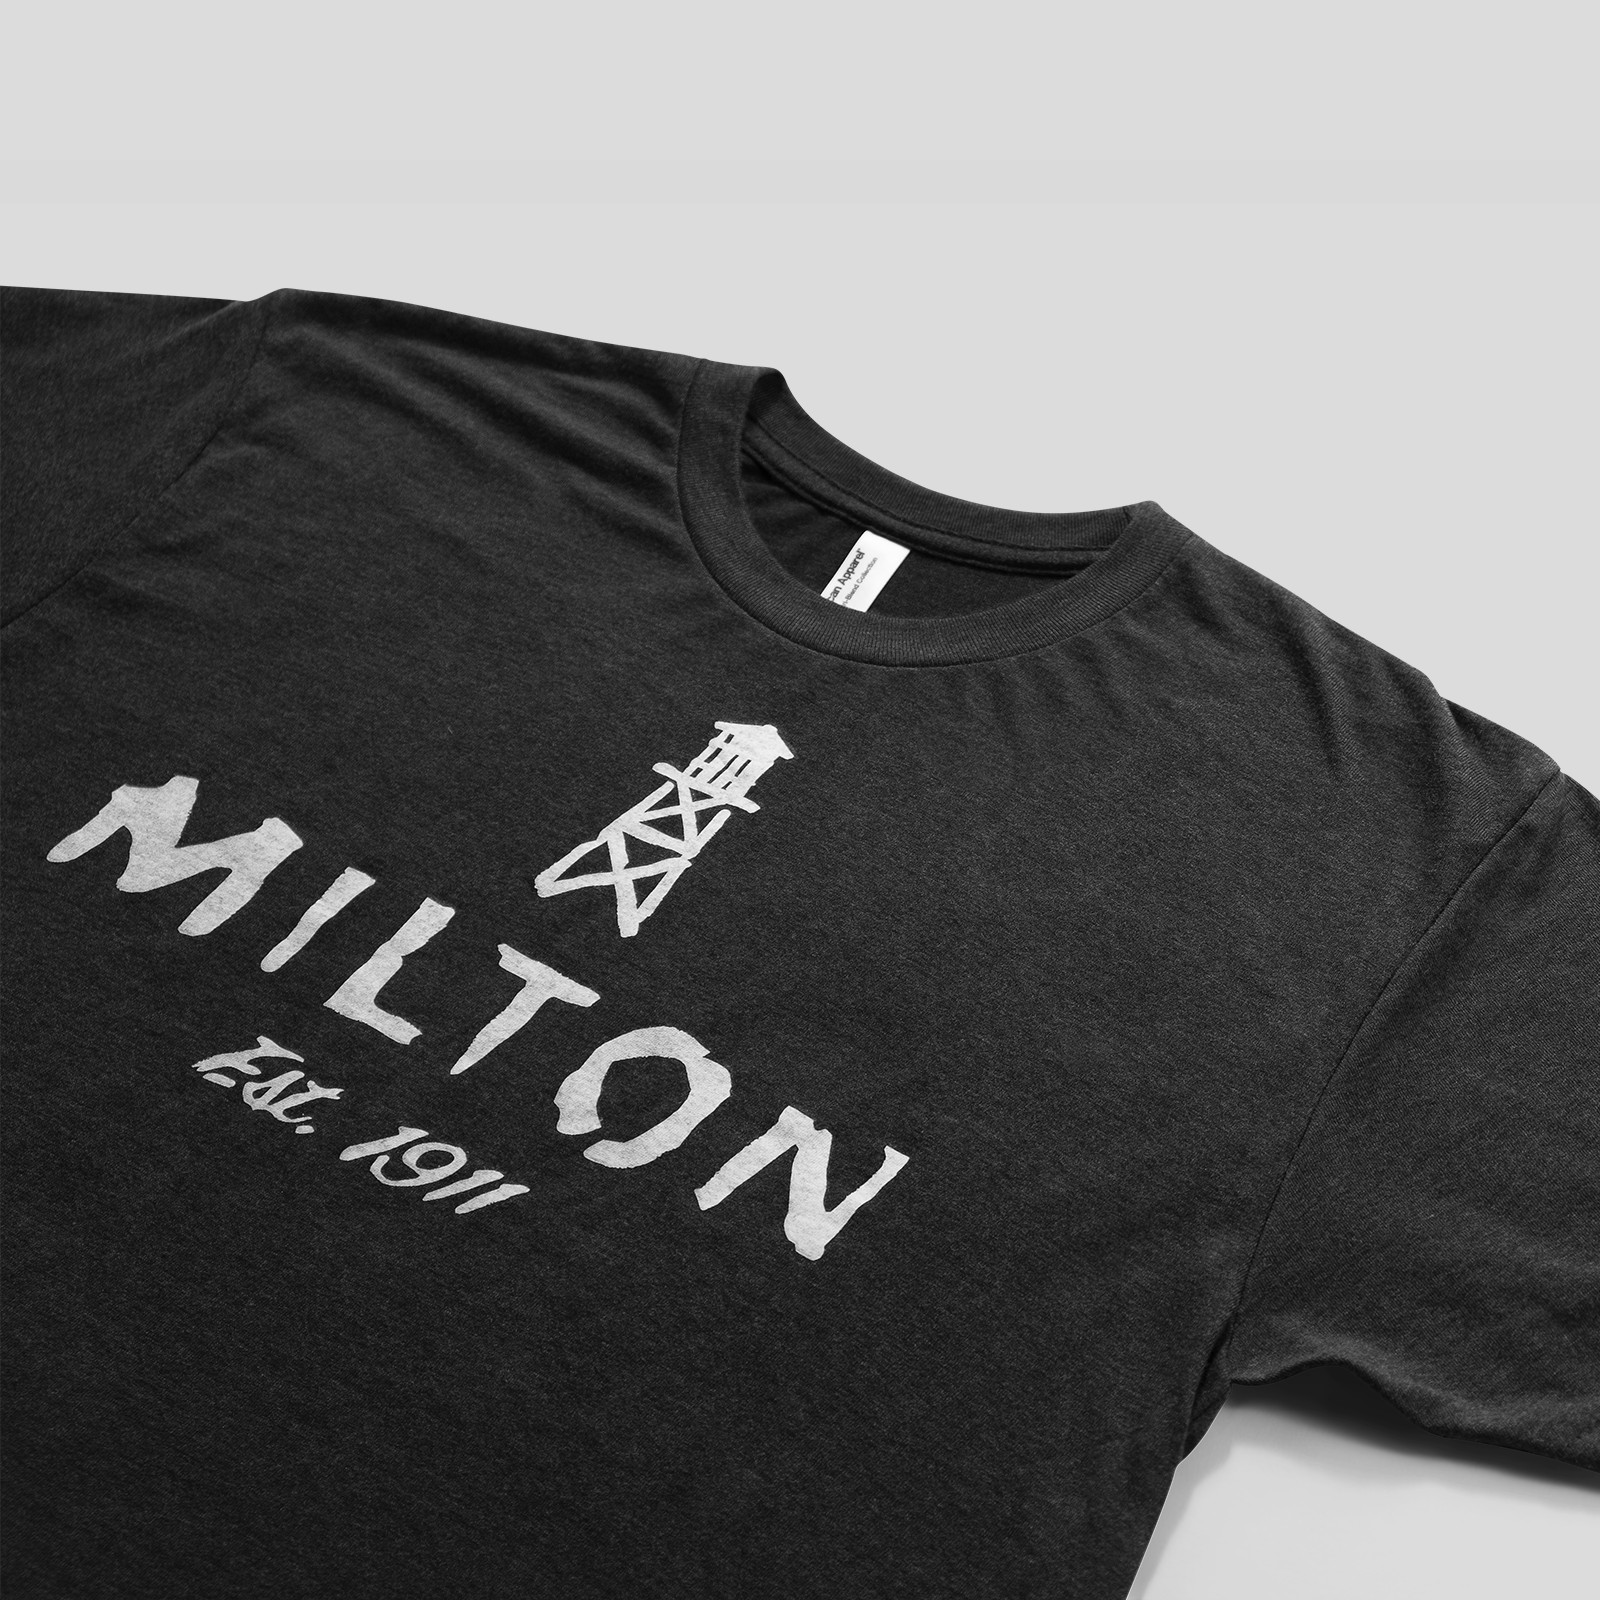 Town of Milton t-shirt for men view from side.